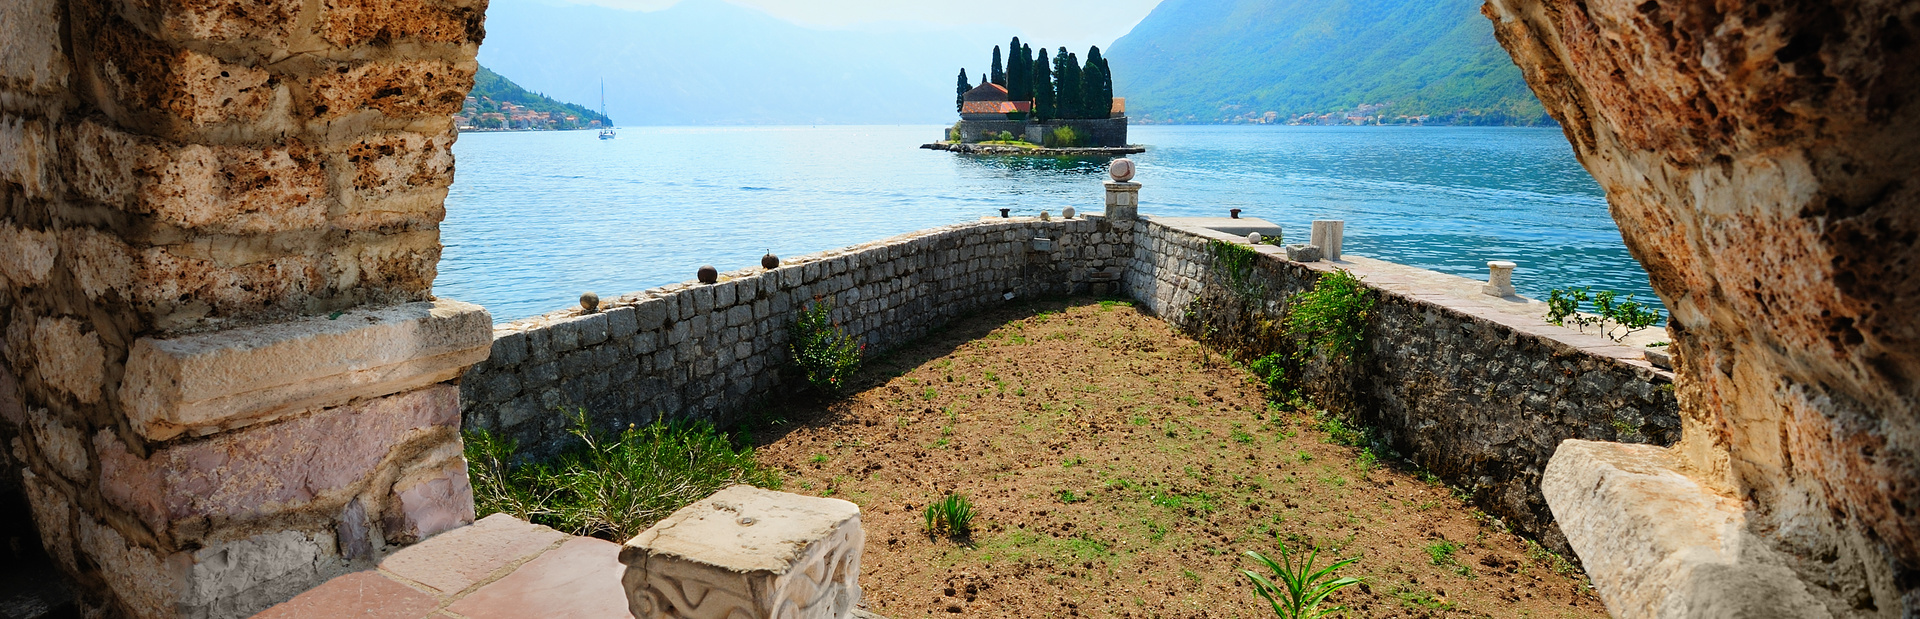 Views from the Benedictine Monastery in Perast